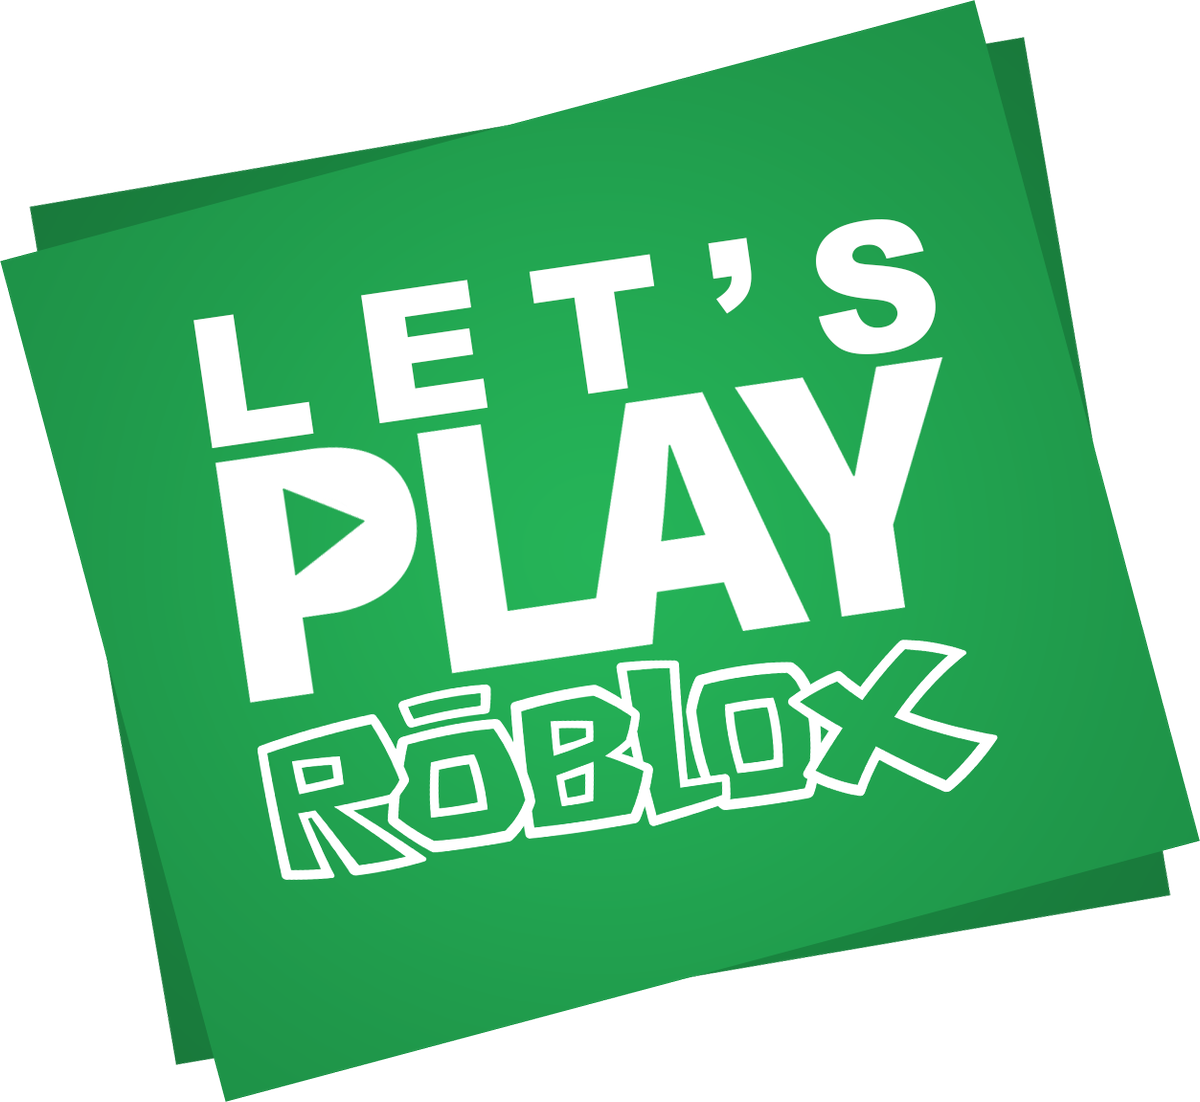 Roblox On Twitter Roll Initiative Time For Rpg Adventures